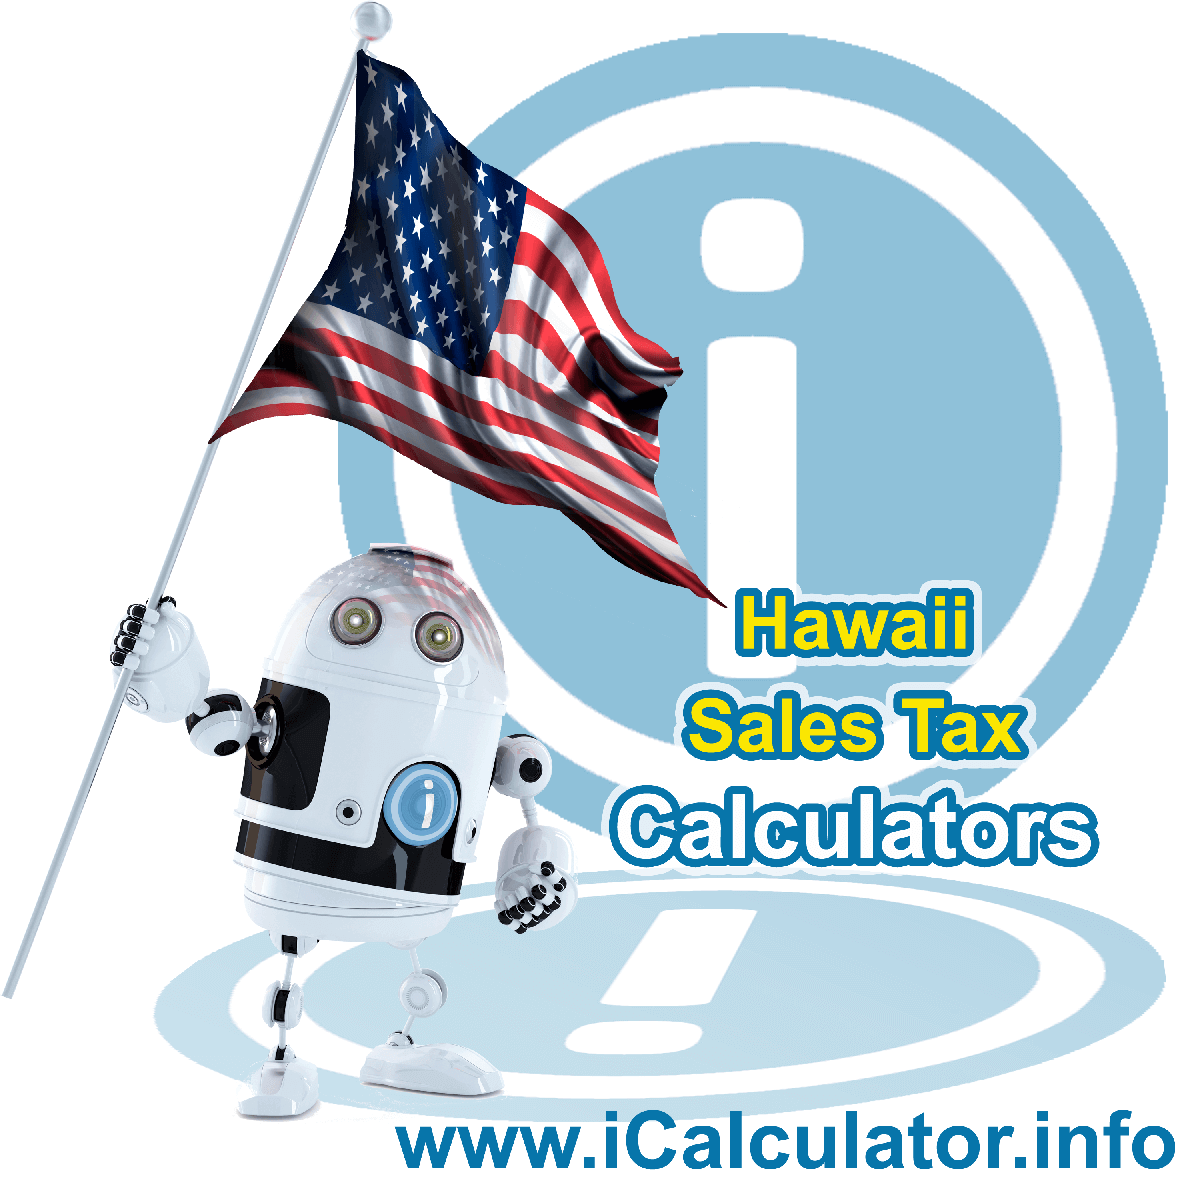 Kamuela Sales Rates: This image illustrates a calculator robot calculating Kamuela sales tax manually using the Kamuela Sales Tax Formula. You can use this information to calculate Kamuela Sales Tax manually or use the Kamuela Sales Tax Calculator to calculate sales tax online.